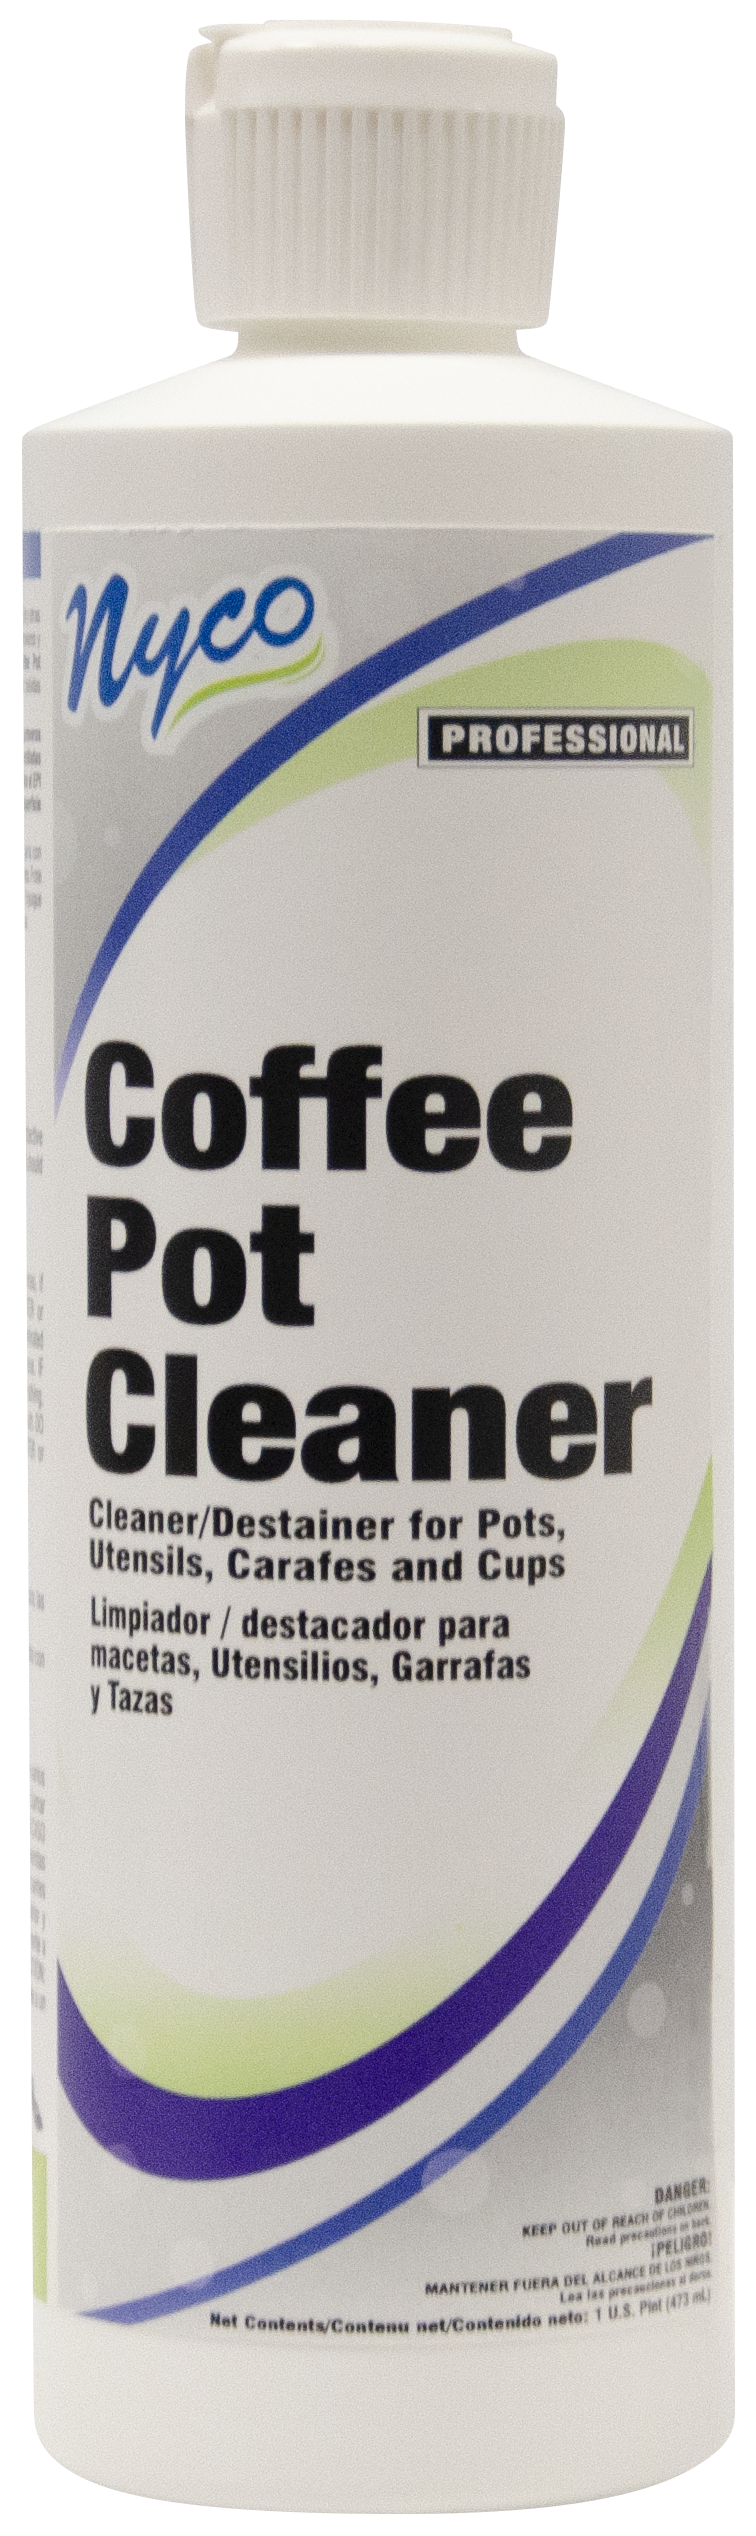 https://www.nycoproducts.com/wp-content/uploads/2020/03/NL832-616_Coffee-Pot-Cleaner.png